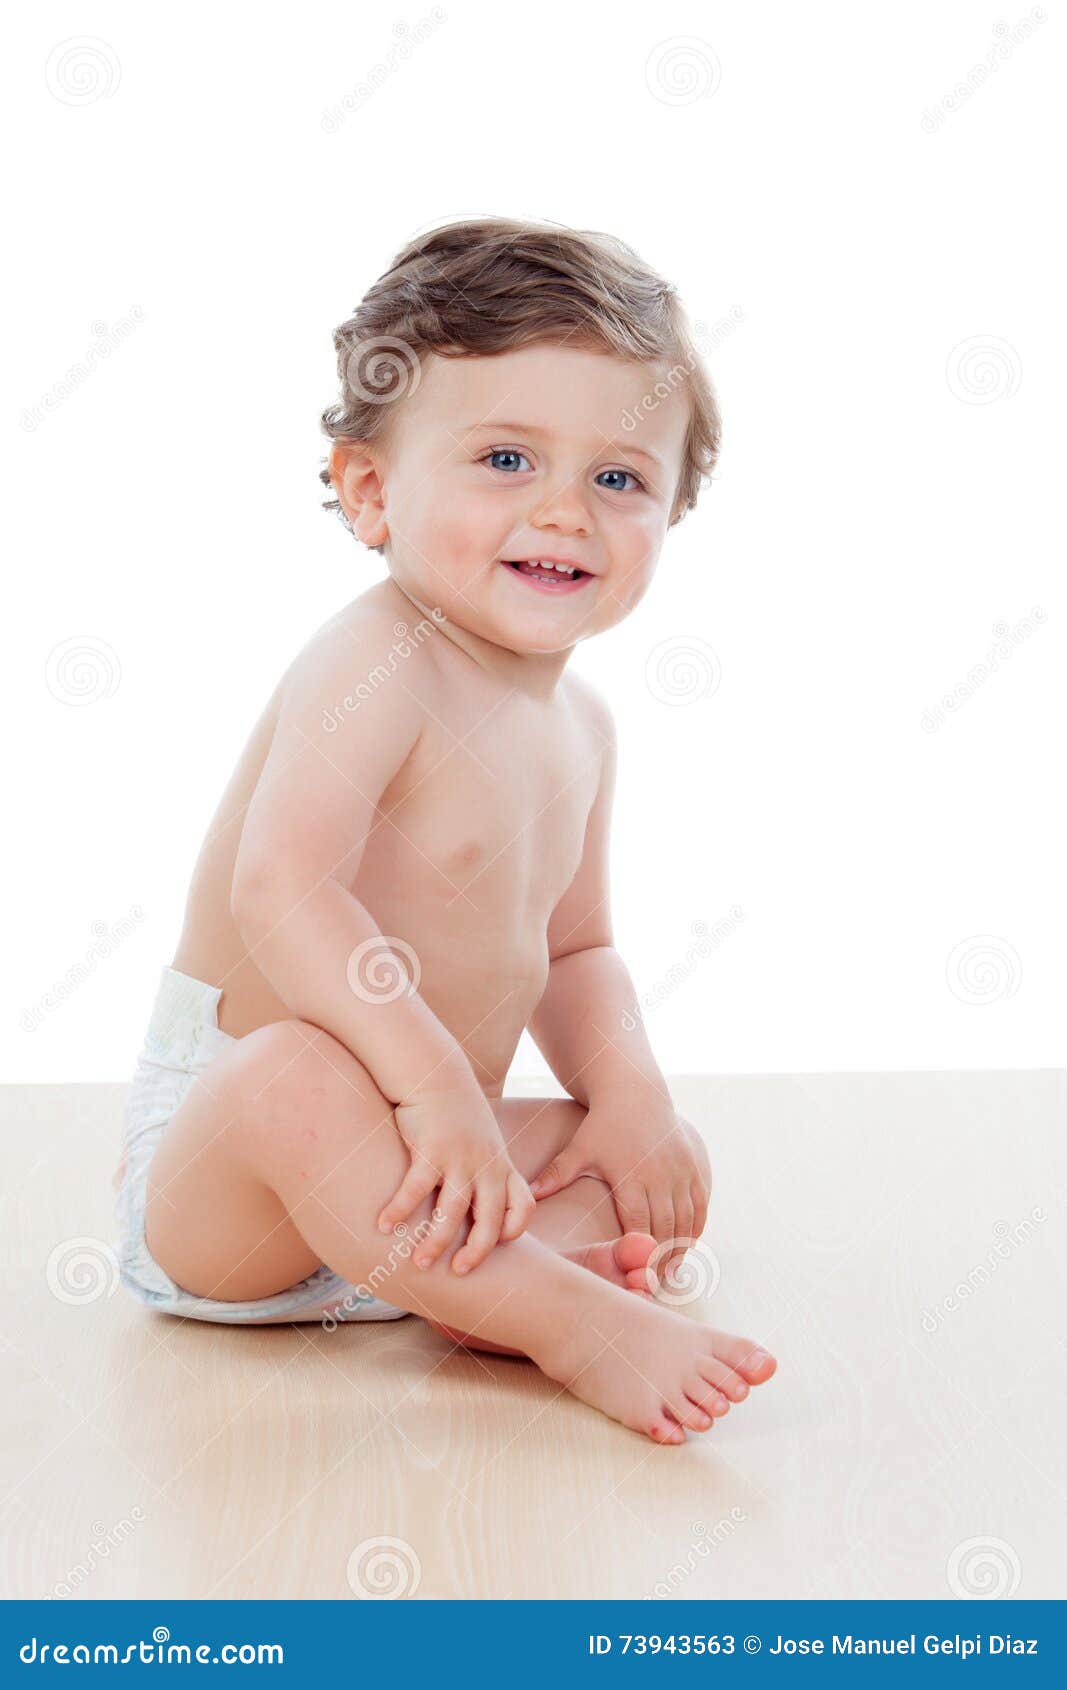 Baby In Diaper Infant Kid Sitting On White One Year Old 